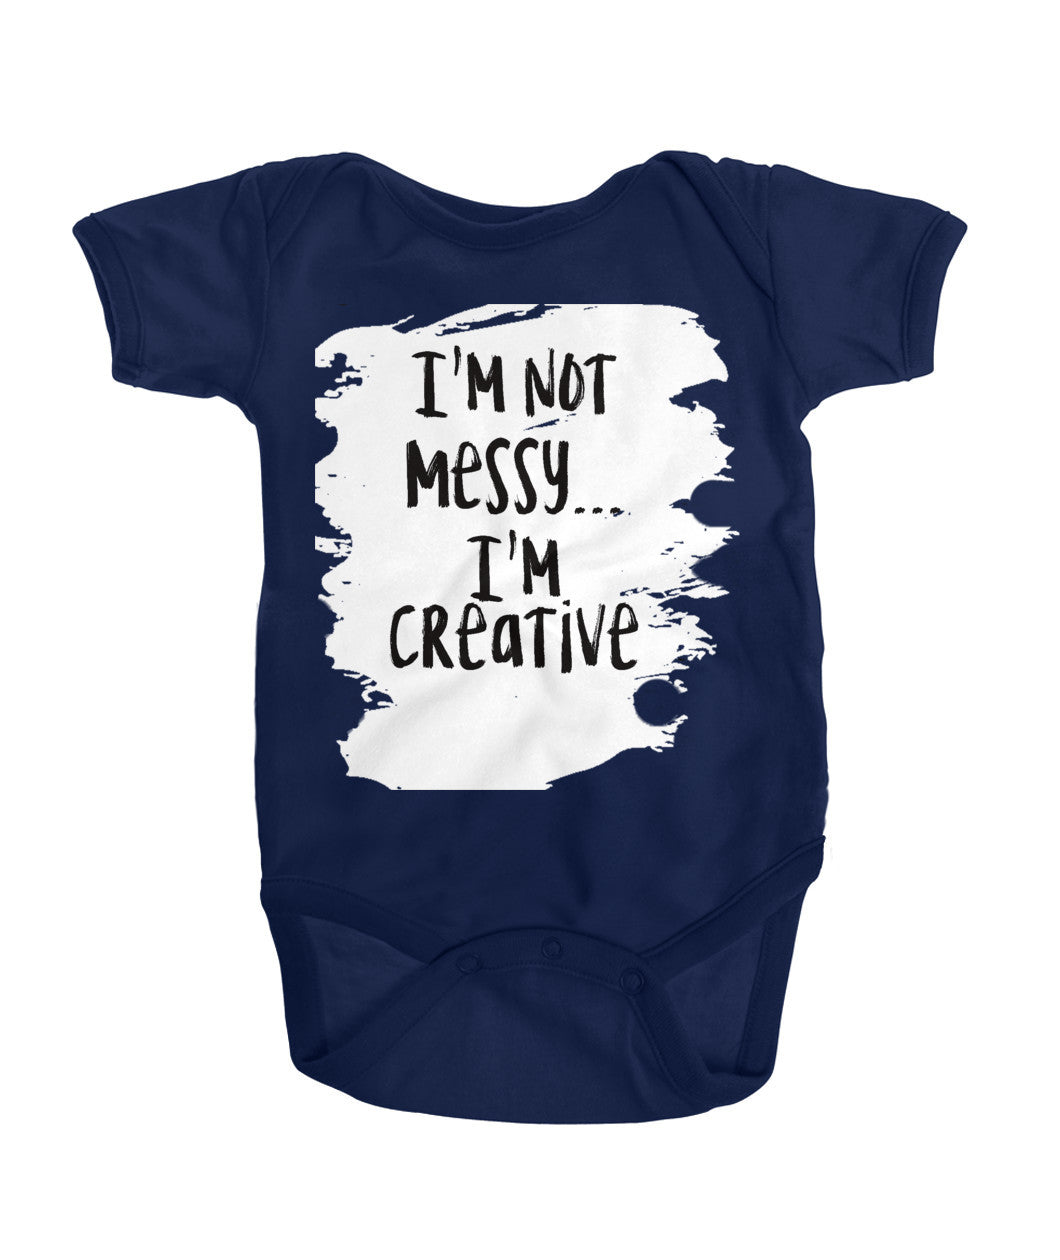 I'm Not MESSY, I'm CREATIVE - Artified Apparel